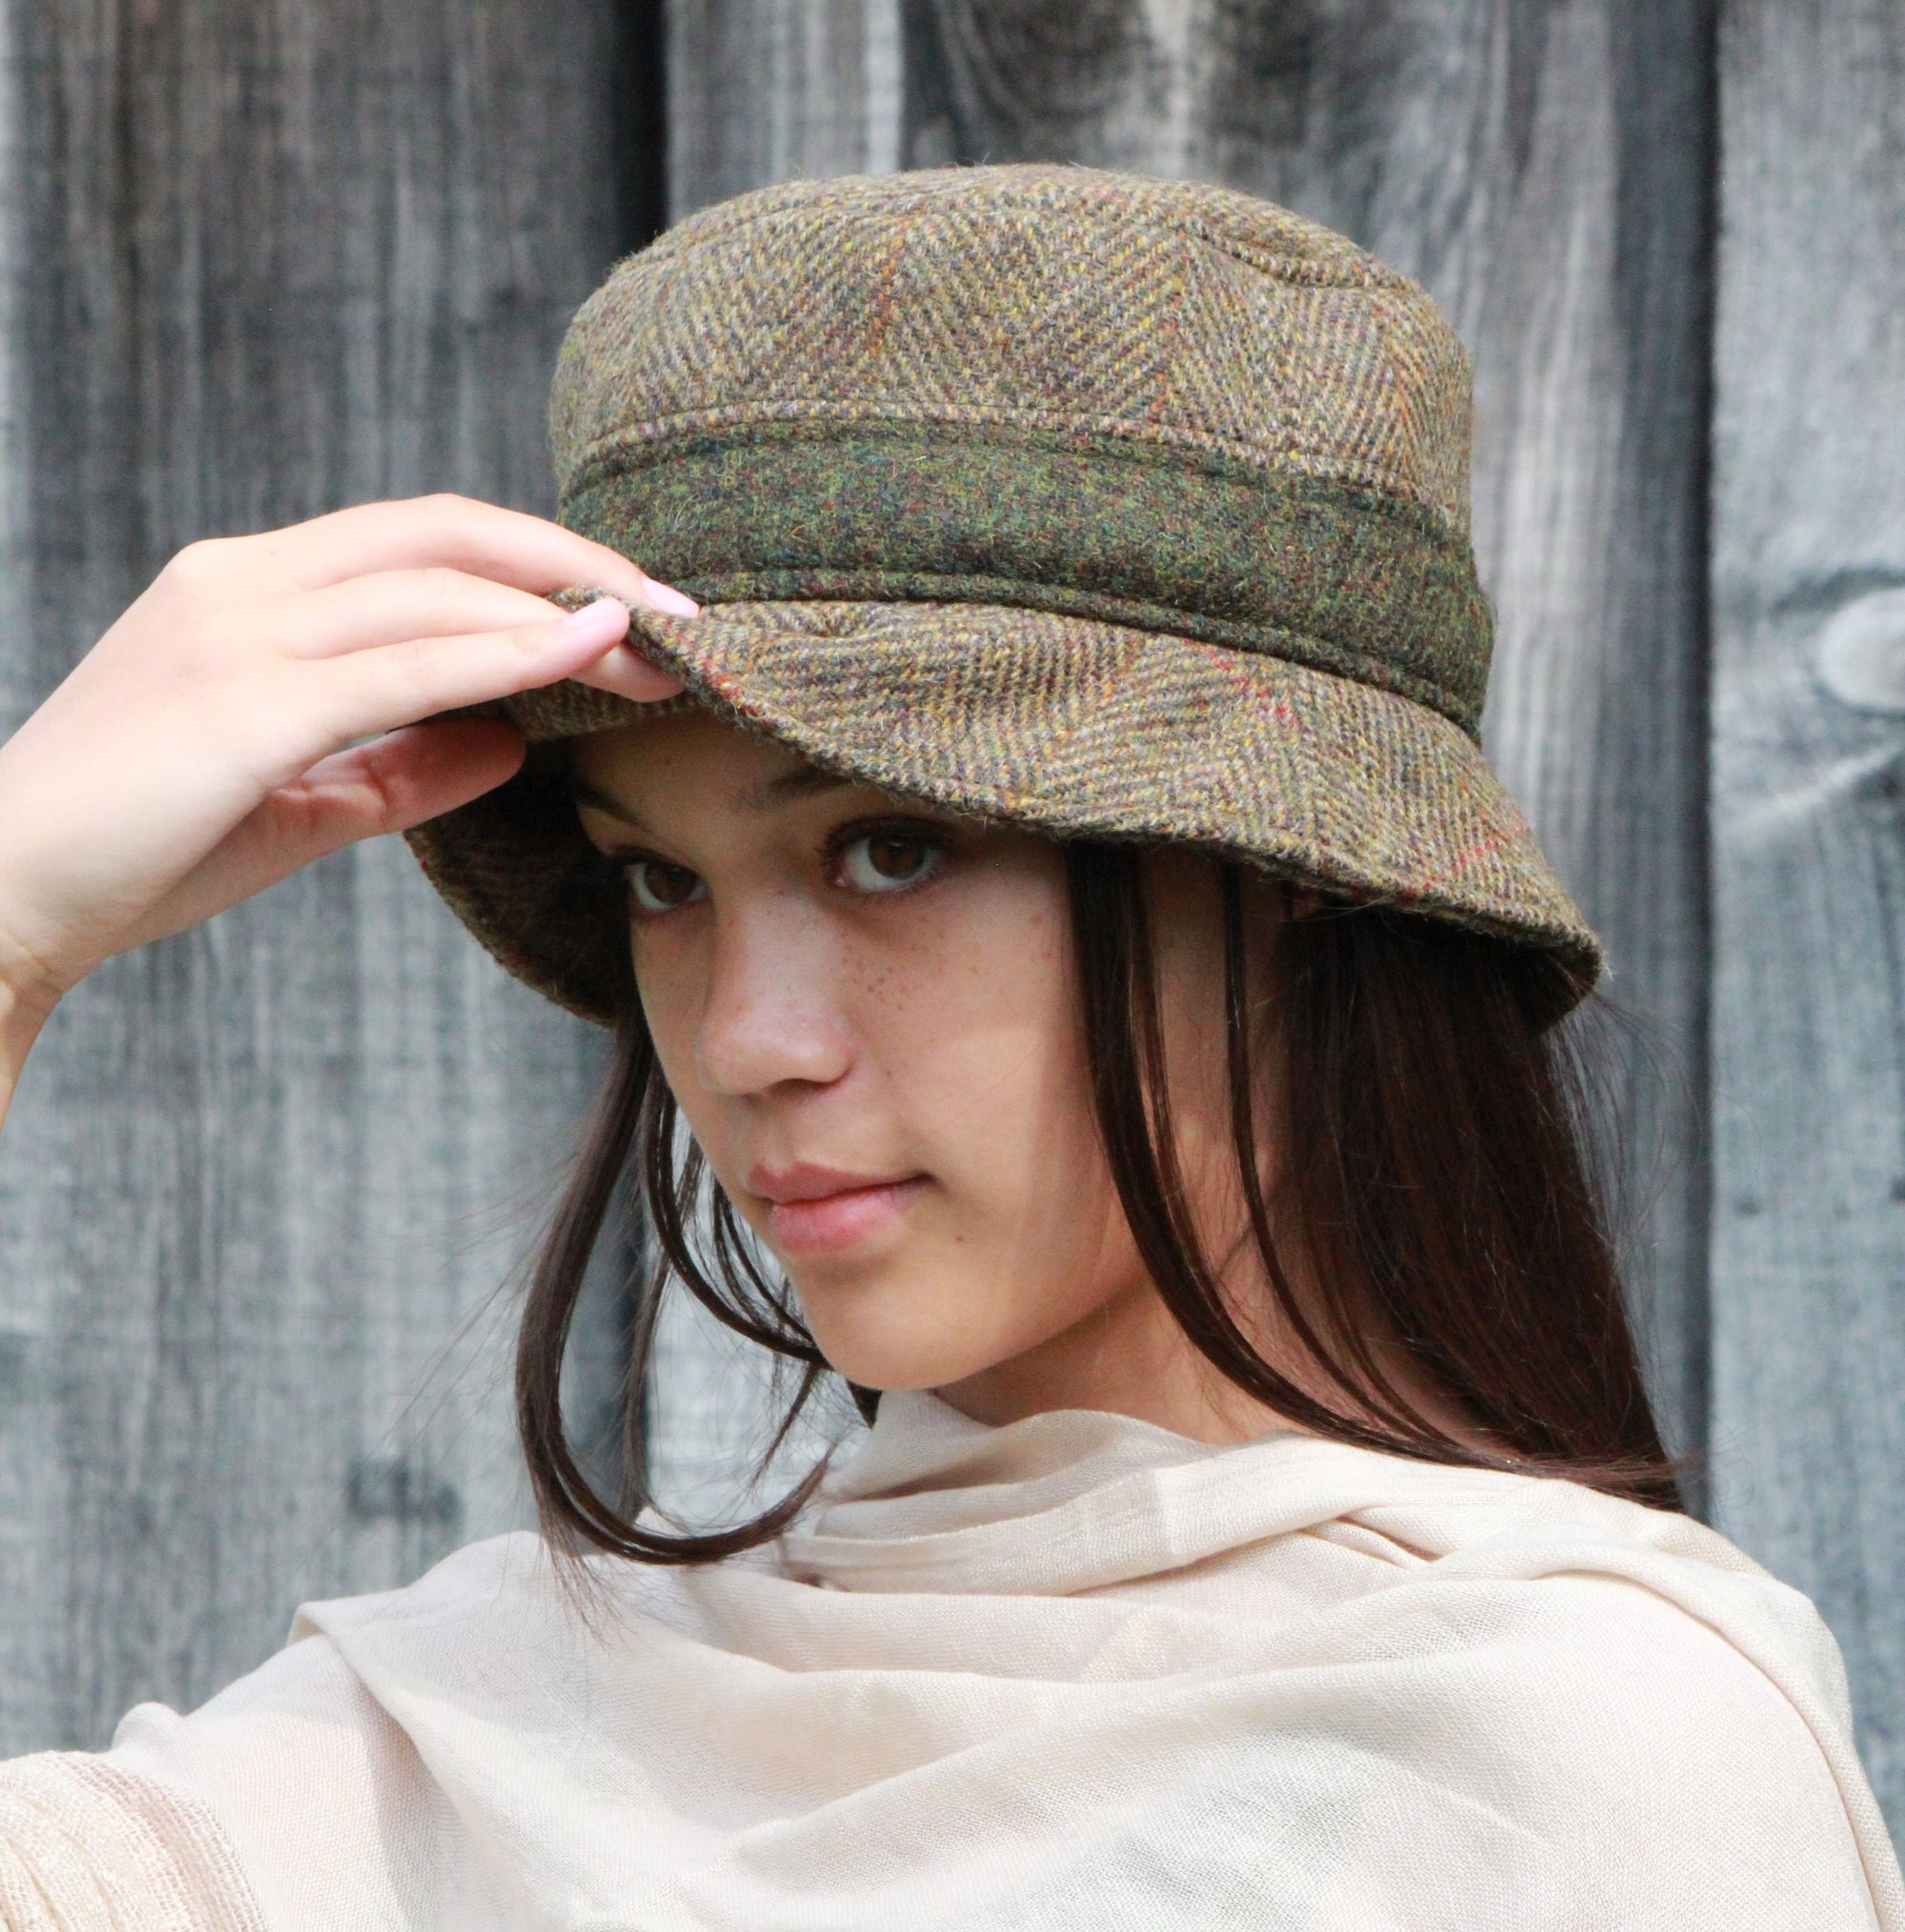 Fall Winter Harris Tweed Wool Bucket Hat-Hand Woven in Outer Hebrides of Scotland-Hat made in Canada by Puffin Gear-Timeless Style